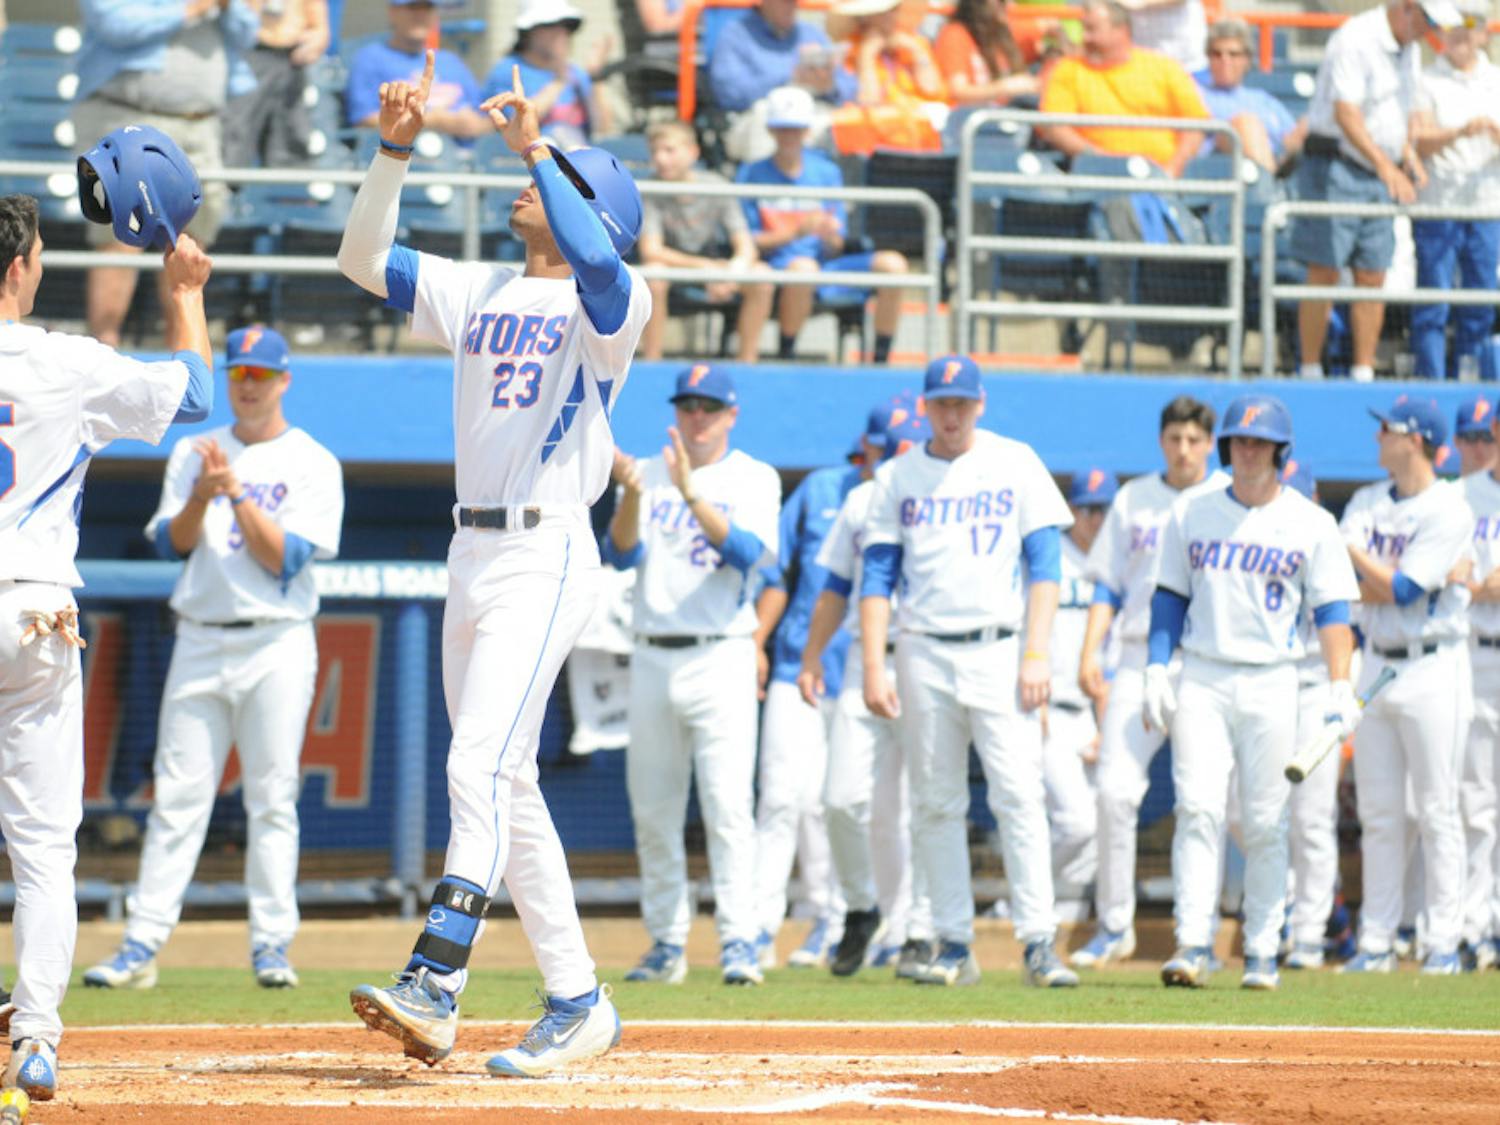 Buddy Reed celebrates after hitting a home run during Florida's 7-5 win over Missouri on March 20, 2016, at McKethan Stadium.